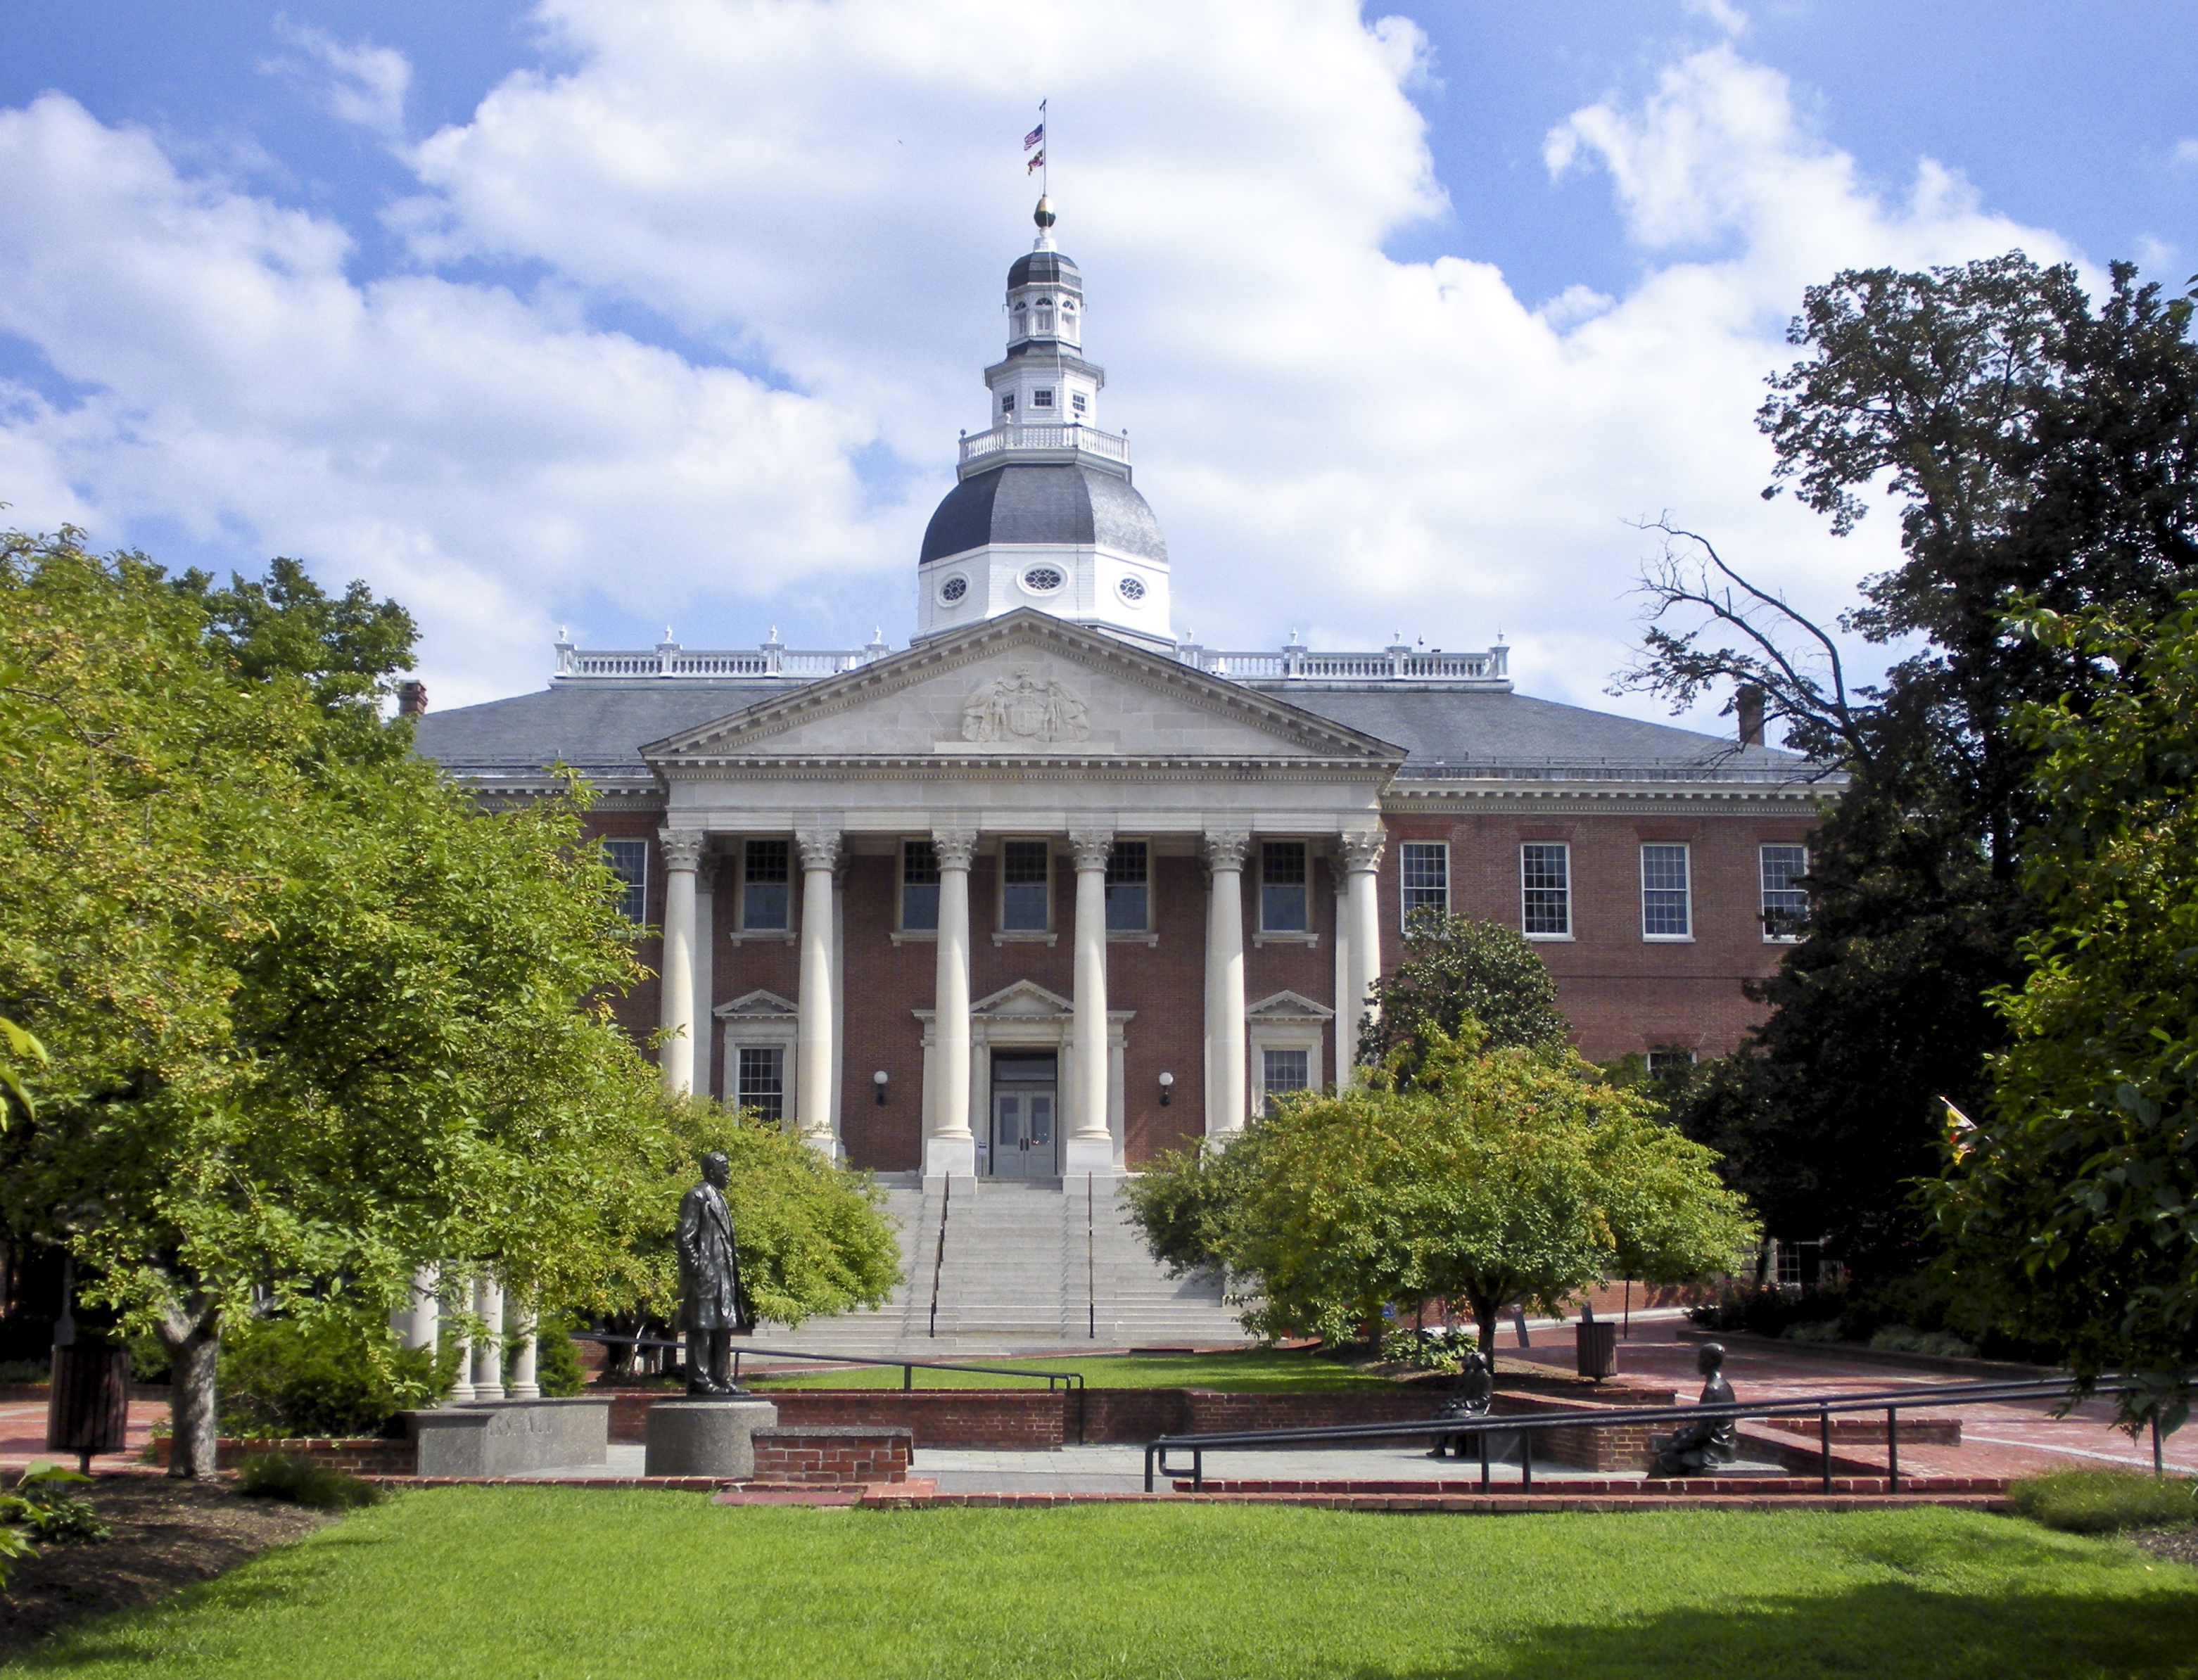 The Maryland State Capitol building, a brick building with a white dome, in Annapolis Maryland.